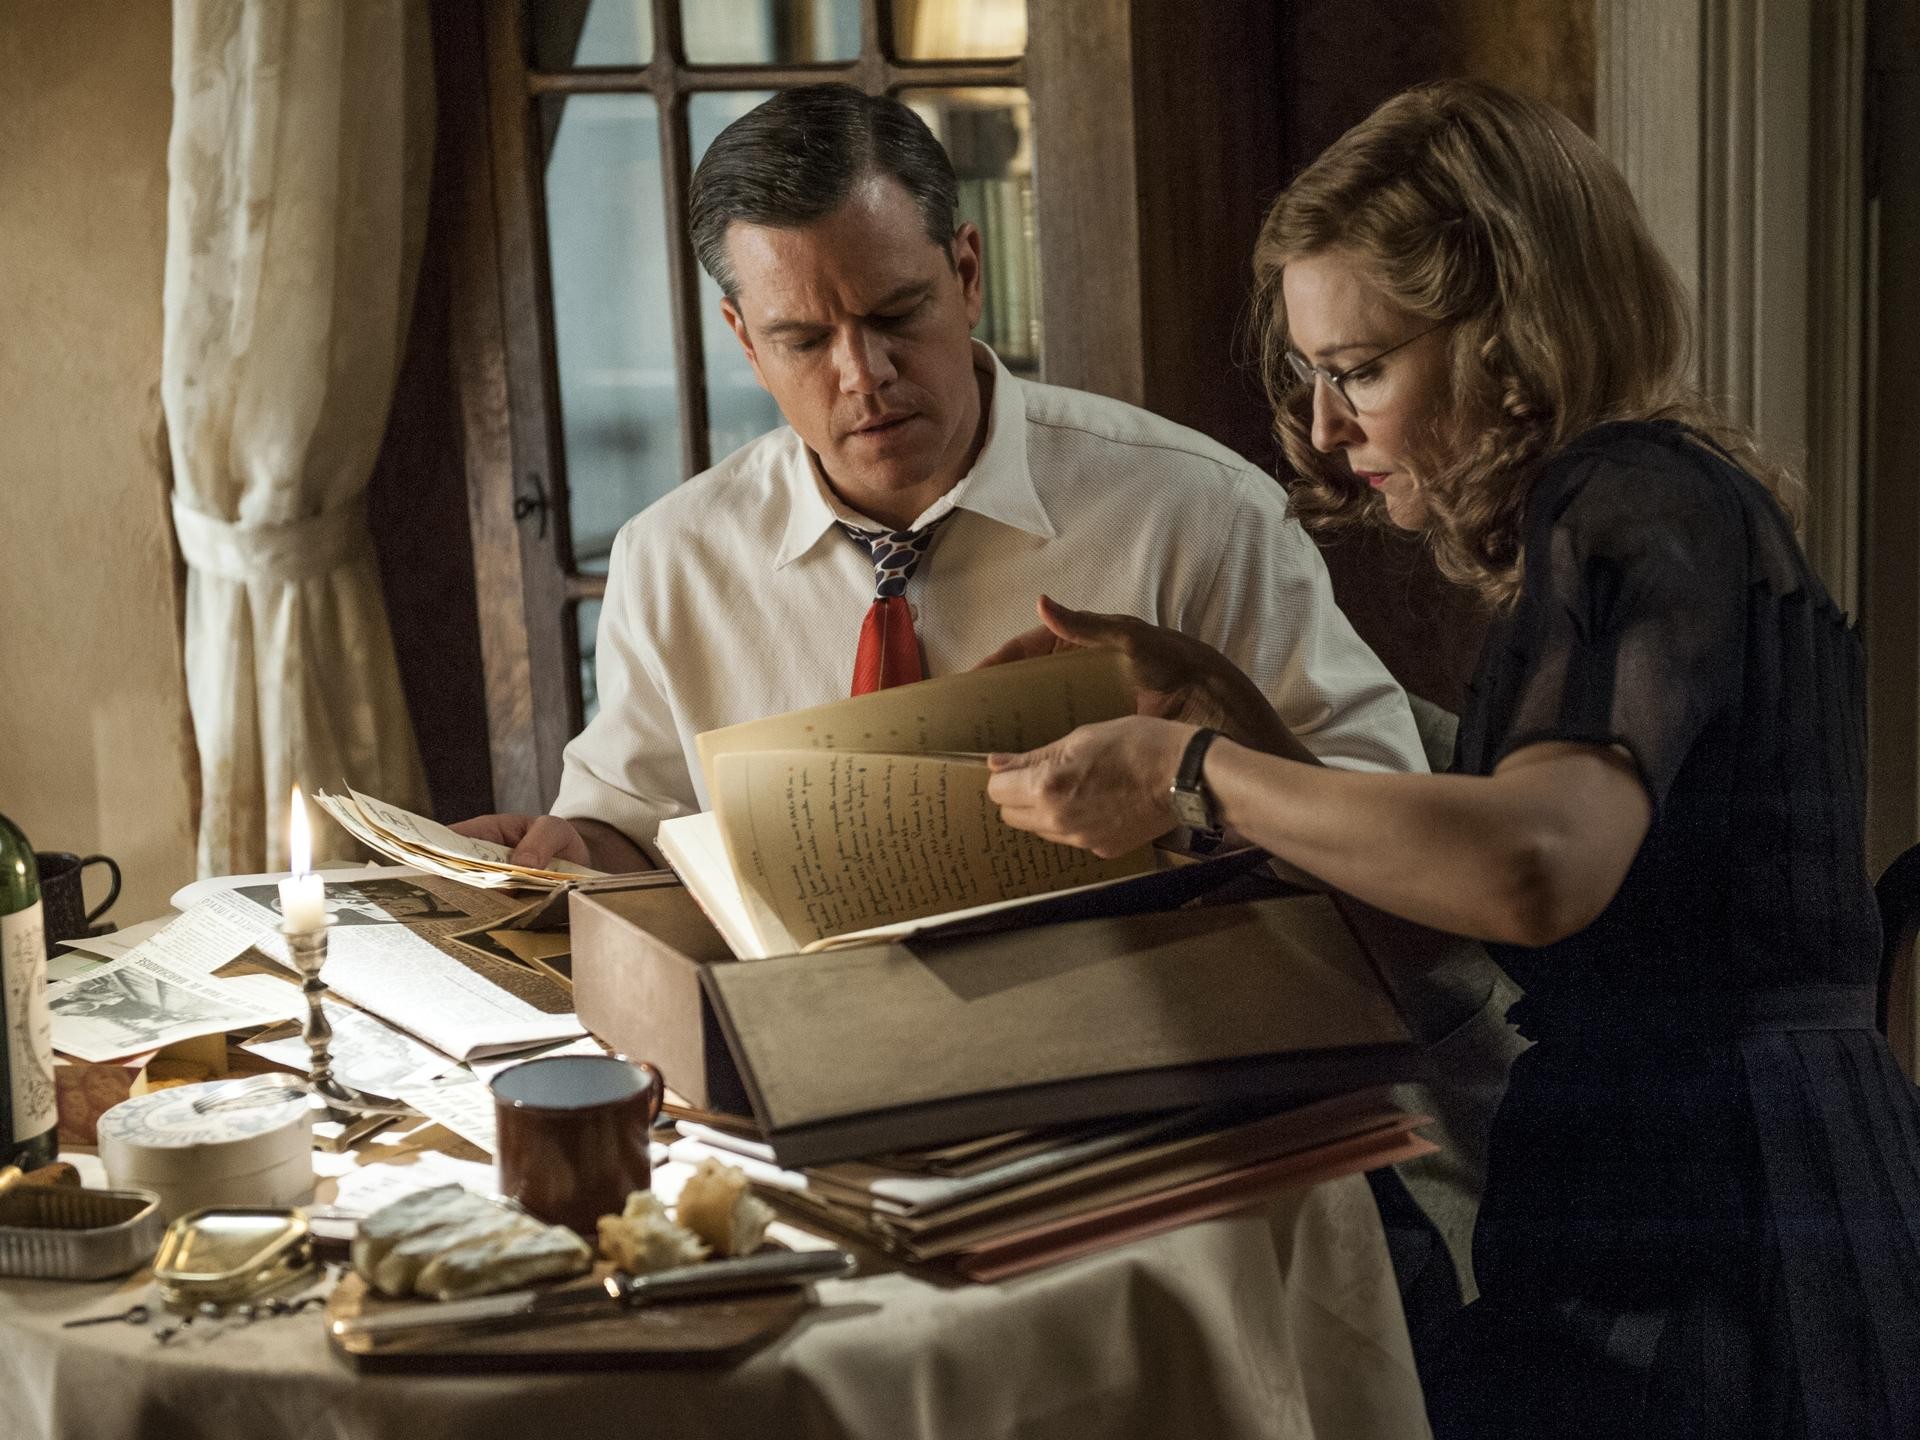 Matt Damon stars as James Granger and Cate Blanchett stars as Claire Simone in Columbia Pictures' The Monuments Men (2014). Photo credit by Claudette Barius.